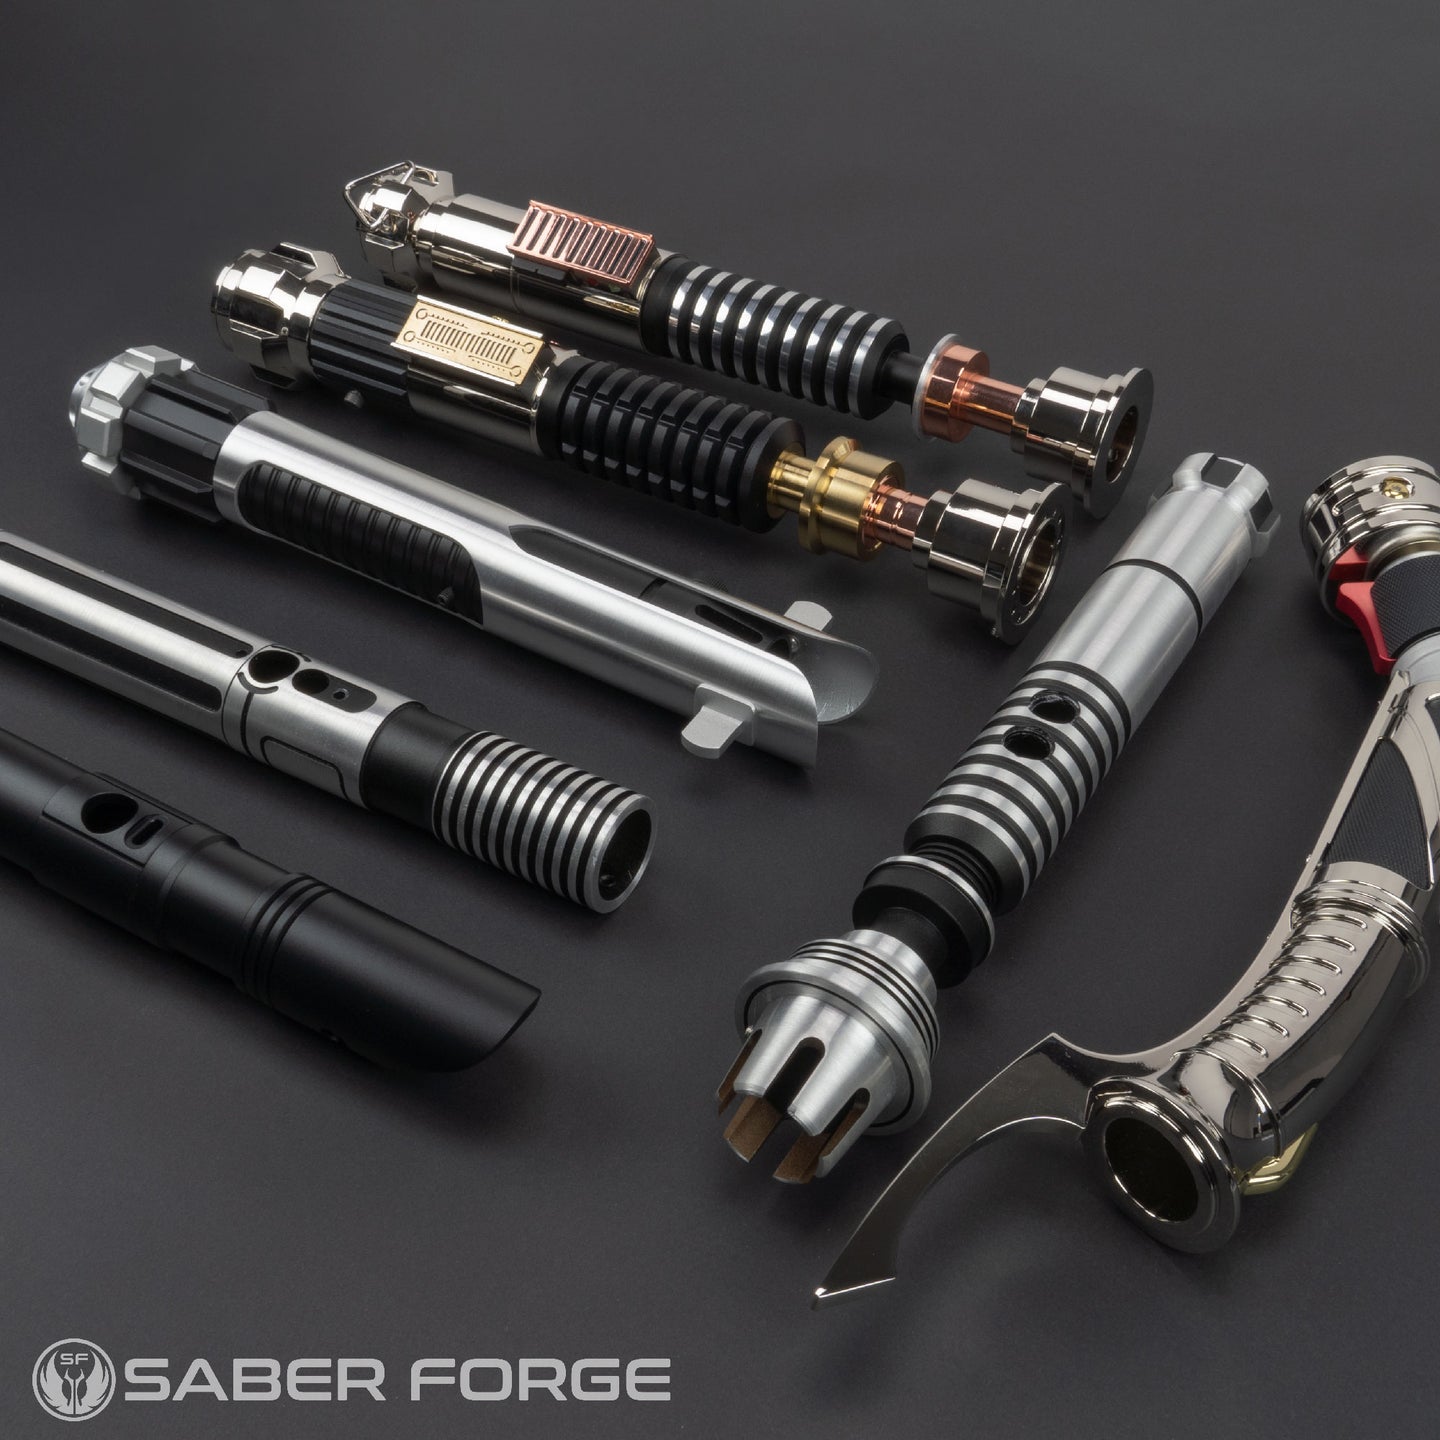 Scratch and Dent Sabers